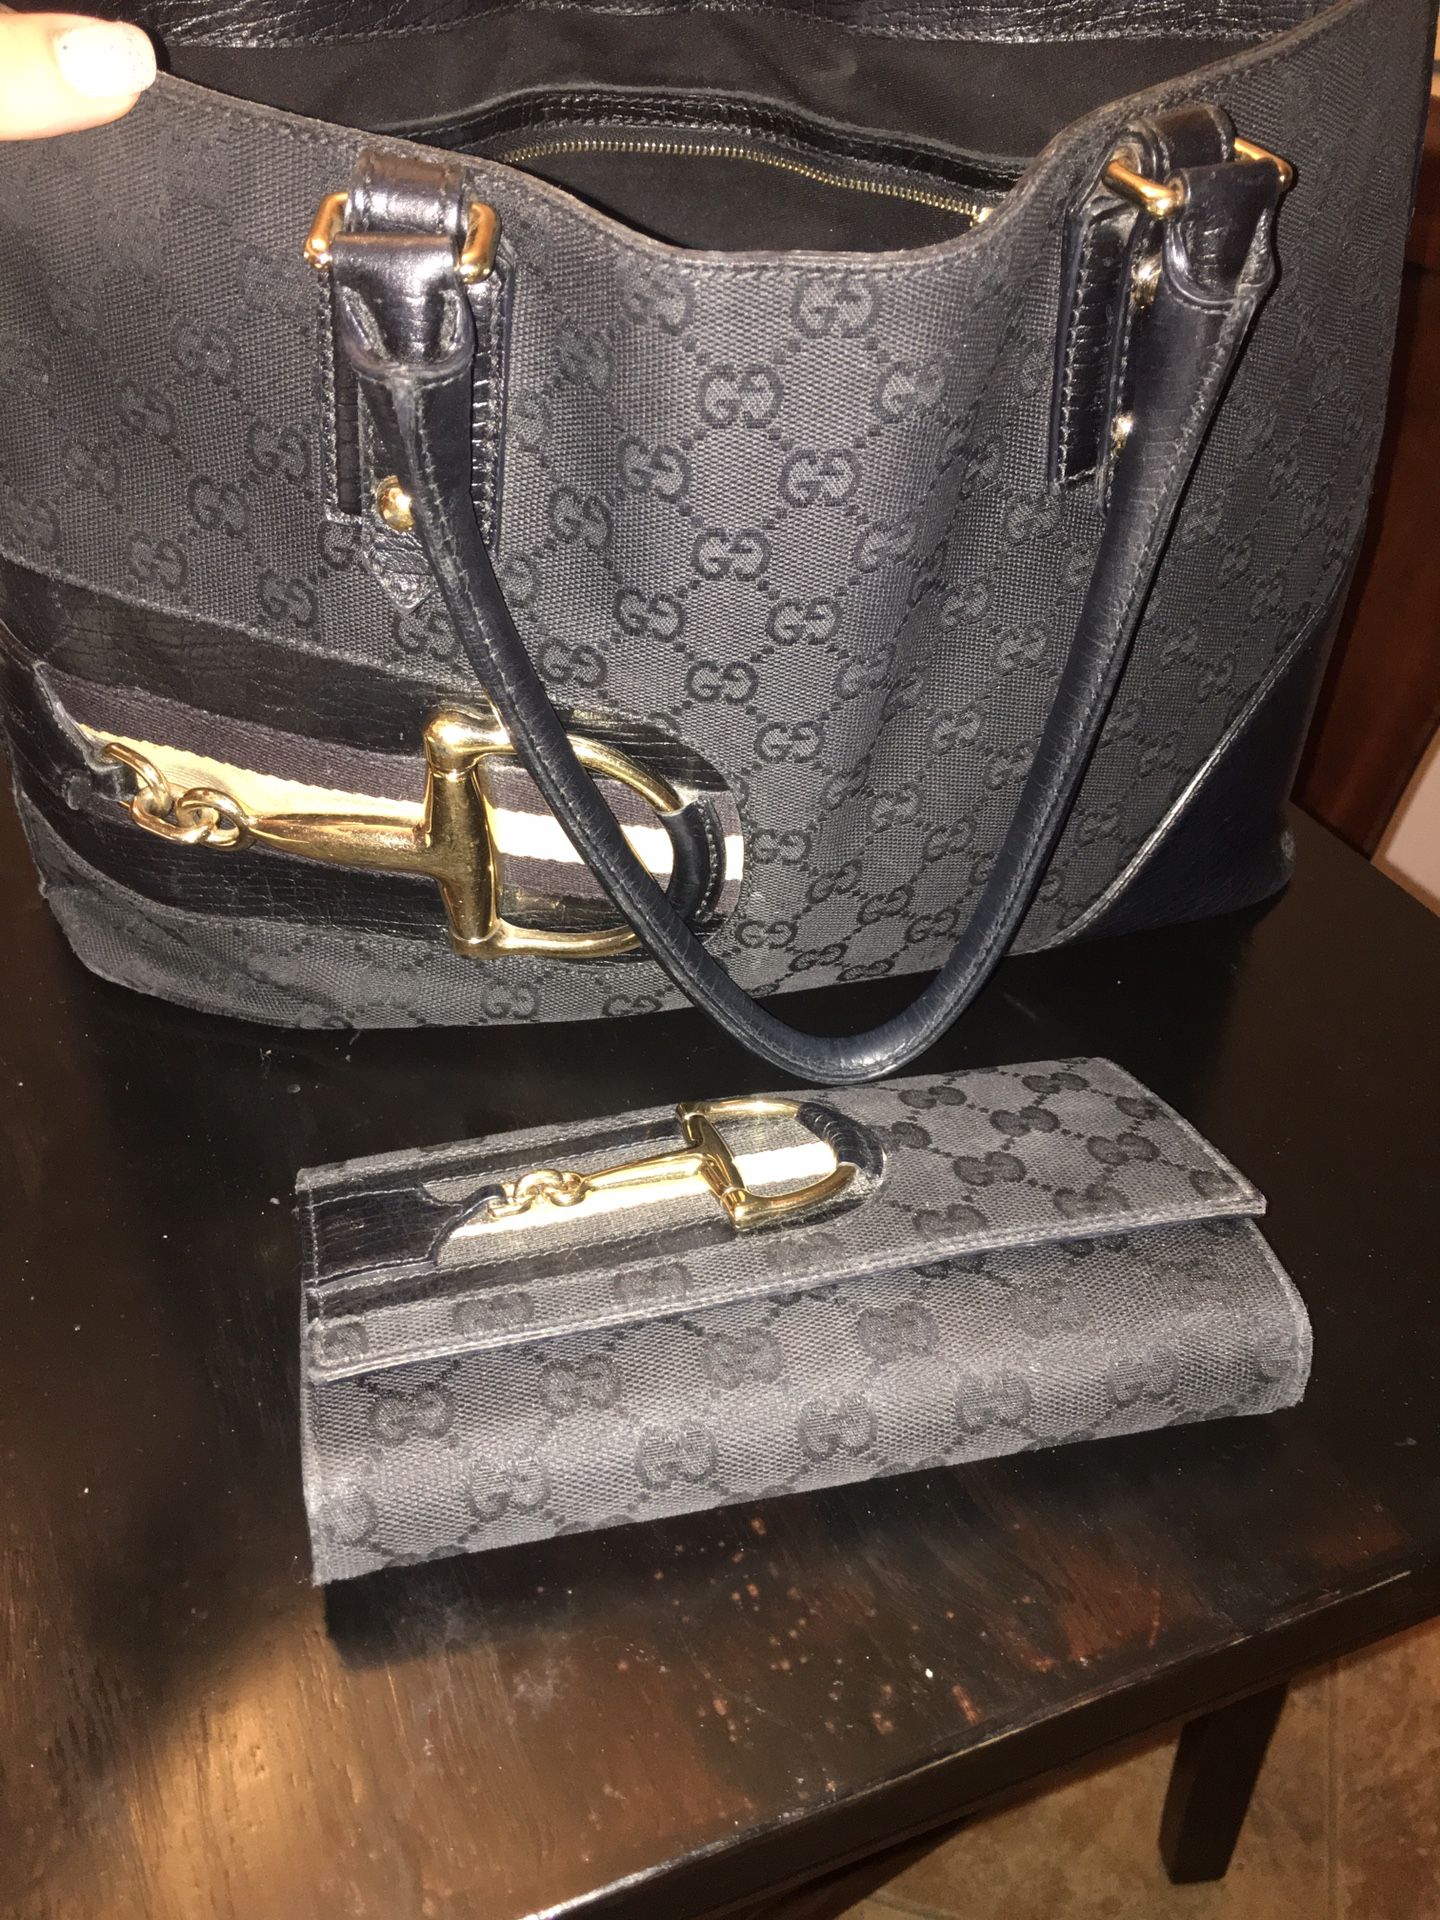 Real, authentic Gucci purse and matching wallet